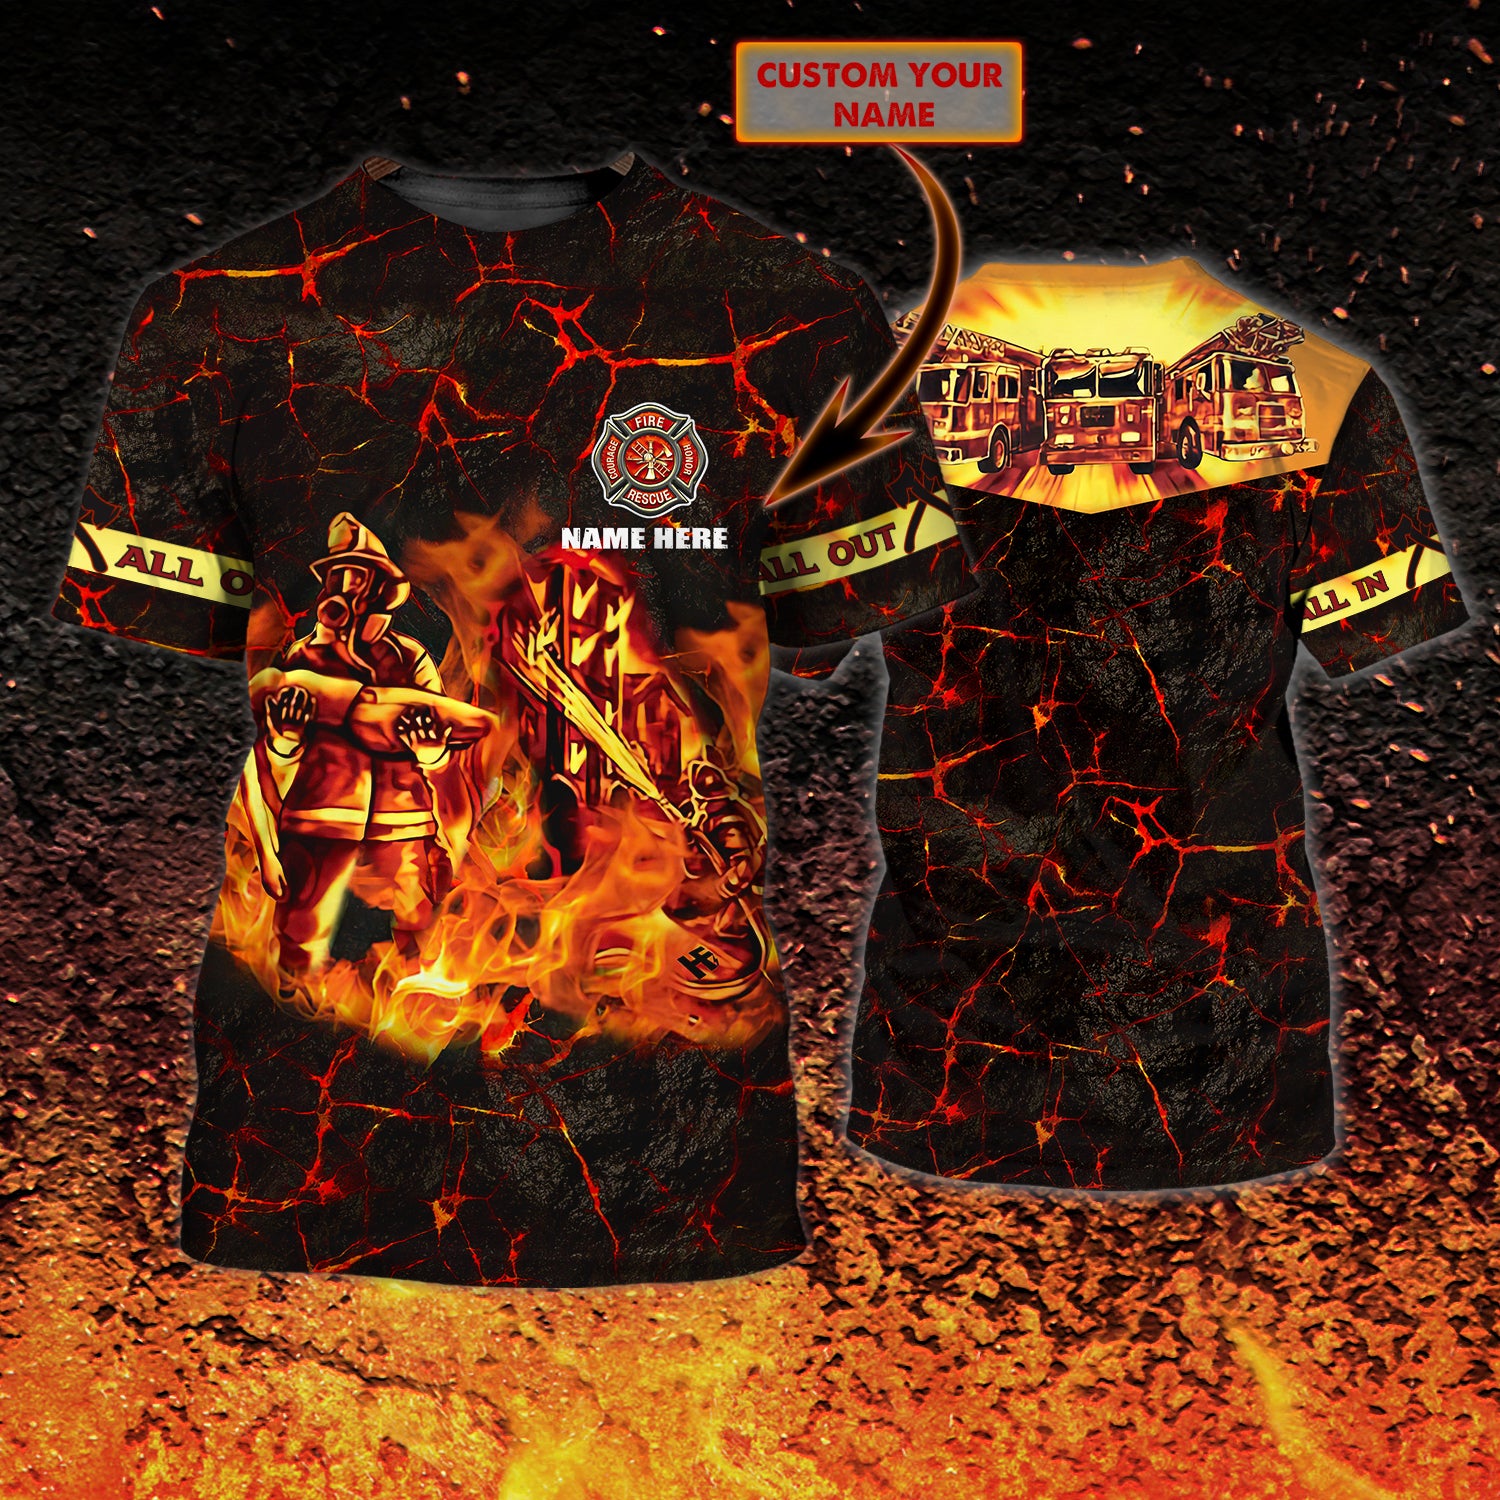 Firefighter - Personalized Name 3D Tshirt For firefighter - HEZ98 17